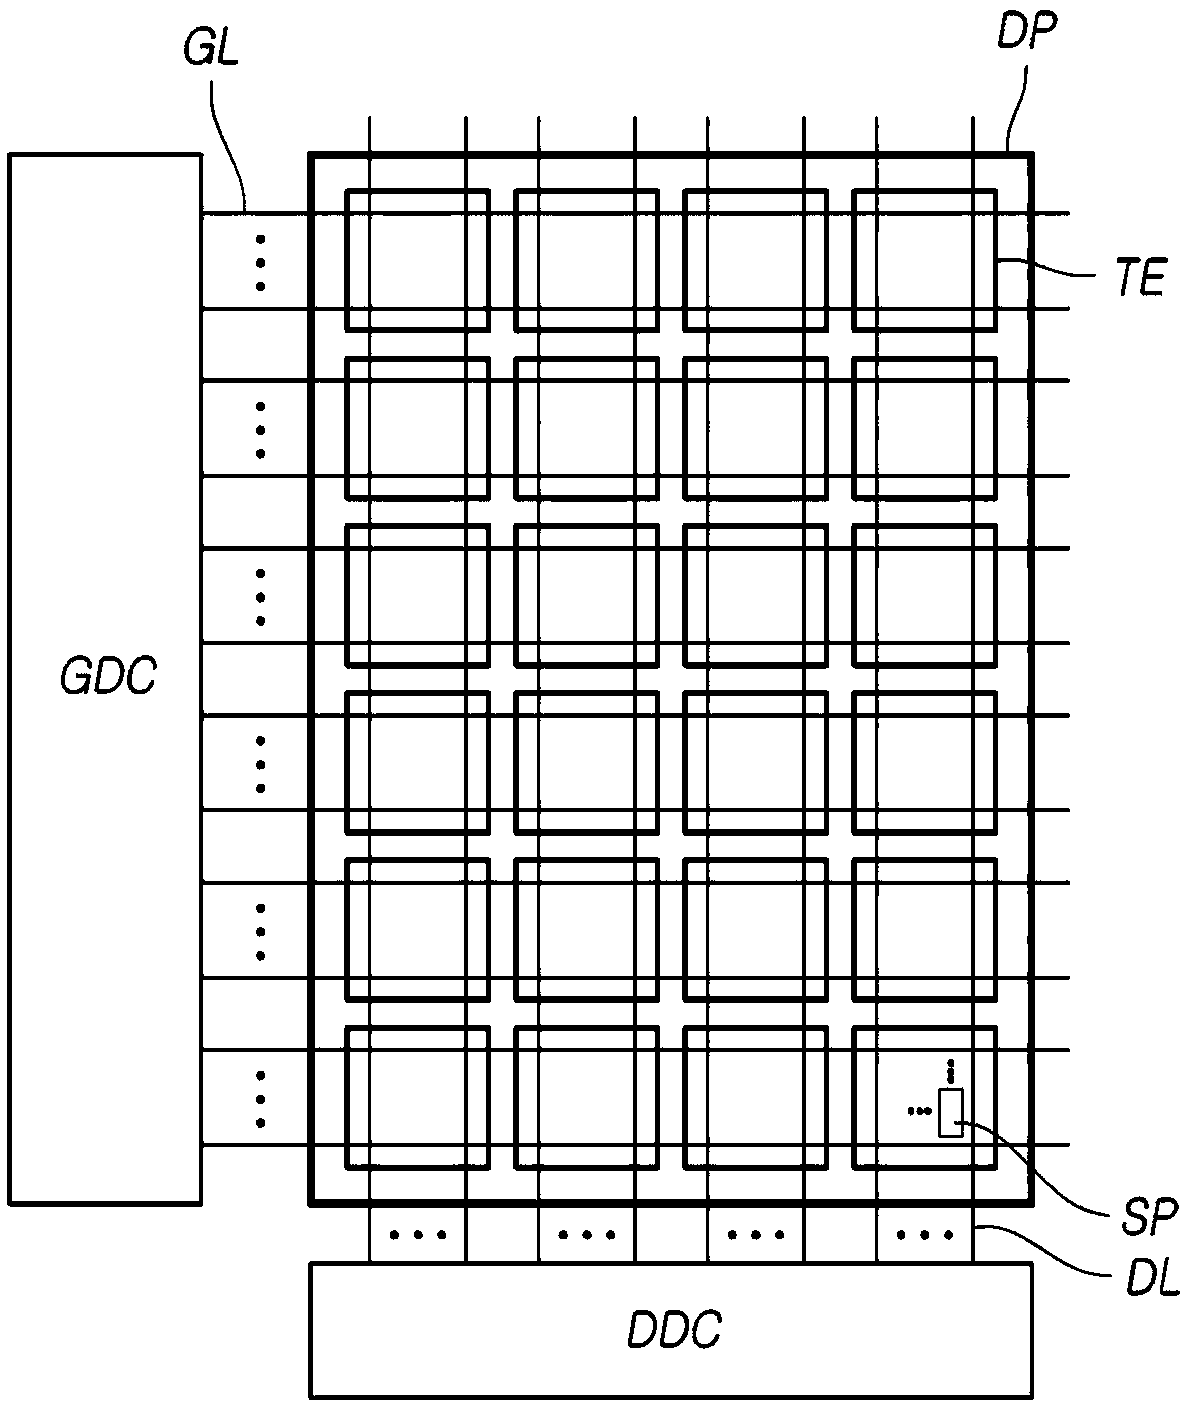 Touch circuit, touch sensing device, and touch sensing method